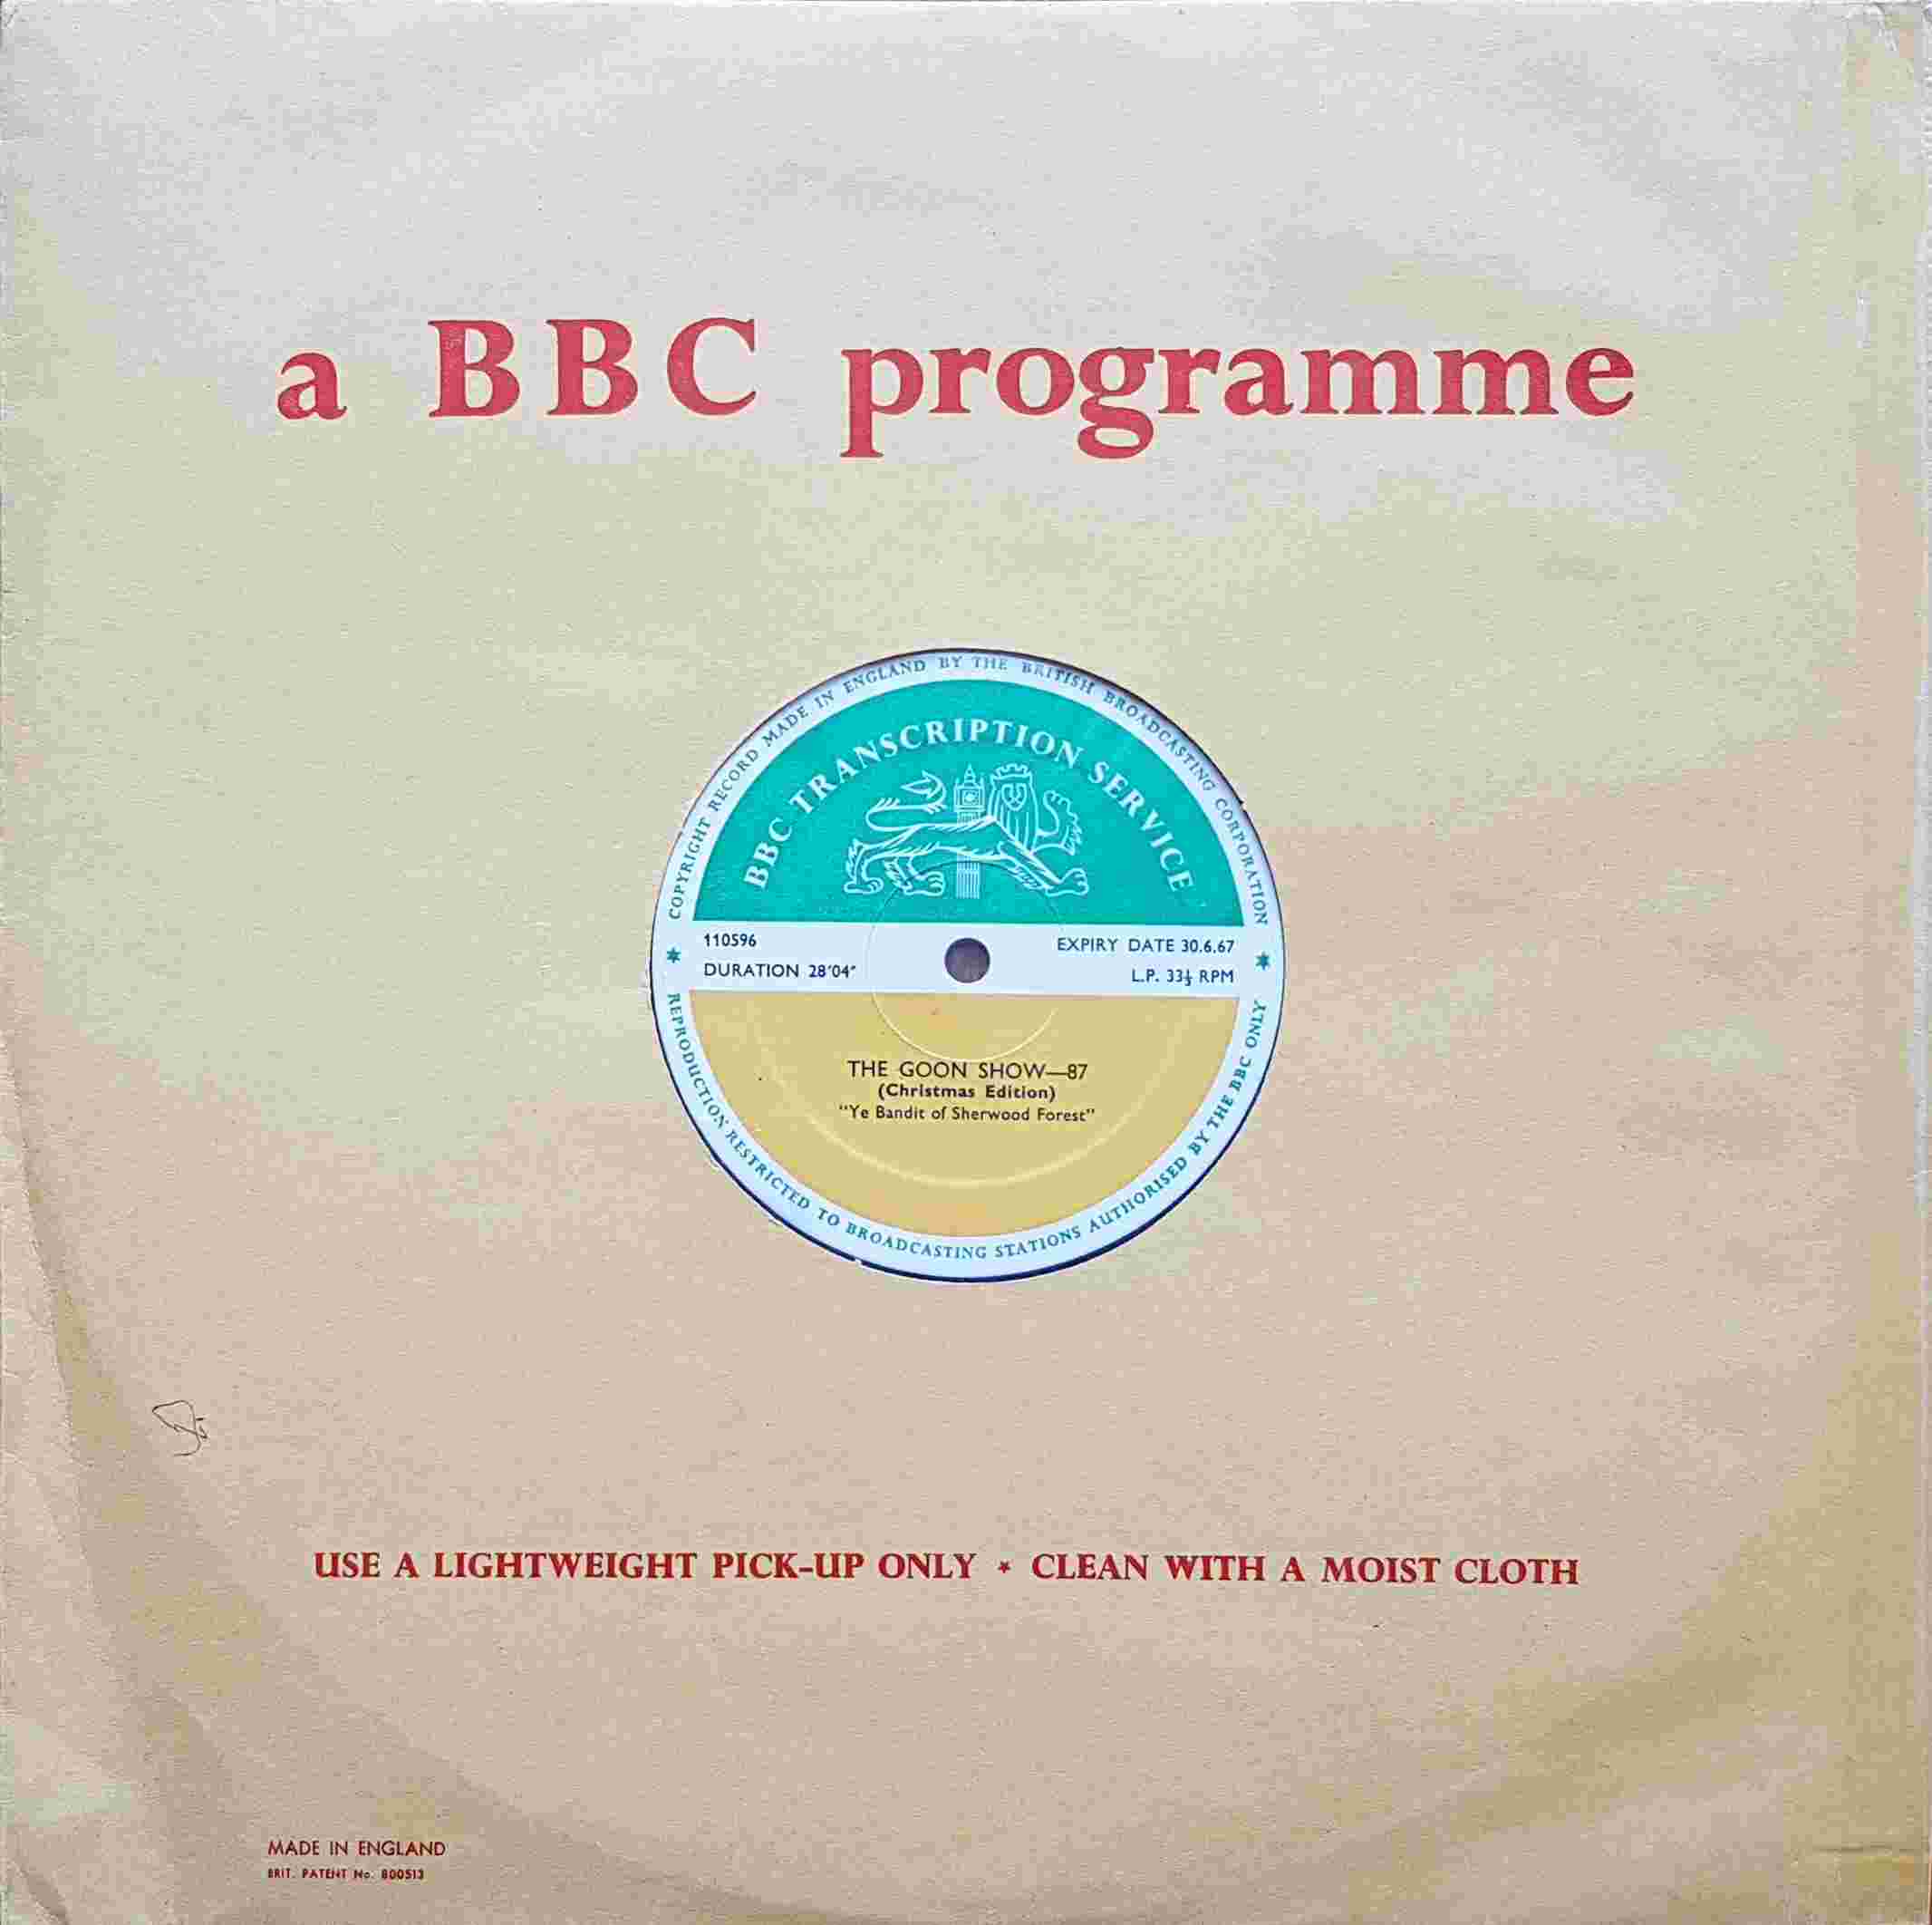 Picture of 110596 The Goon show - 87 & 88 by artist Spike Milligan / Eric Sykes from the BBC albums - Records and Tapes library